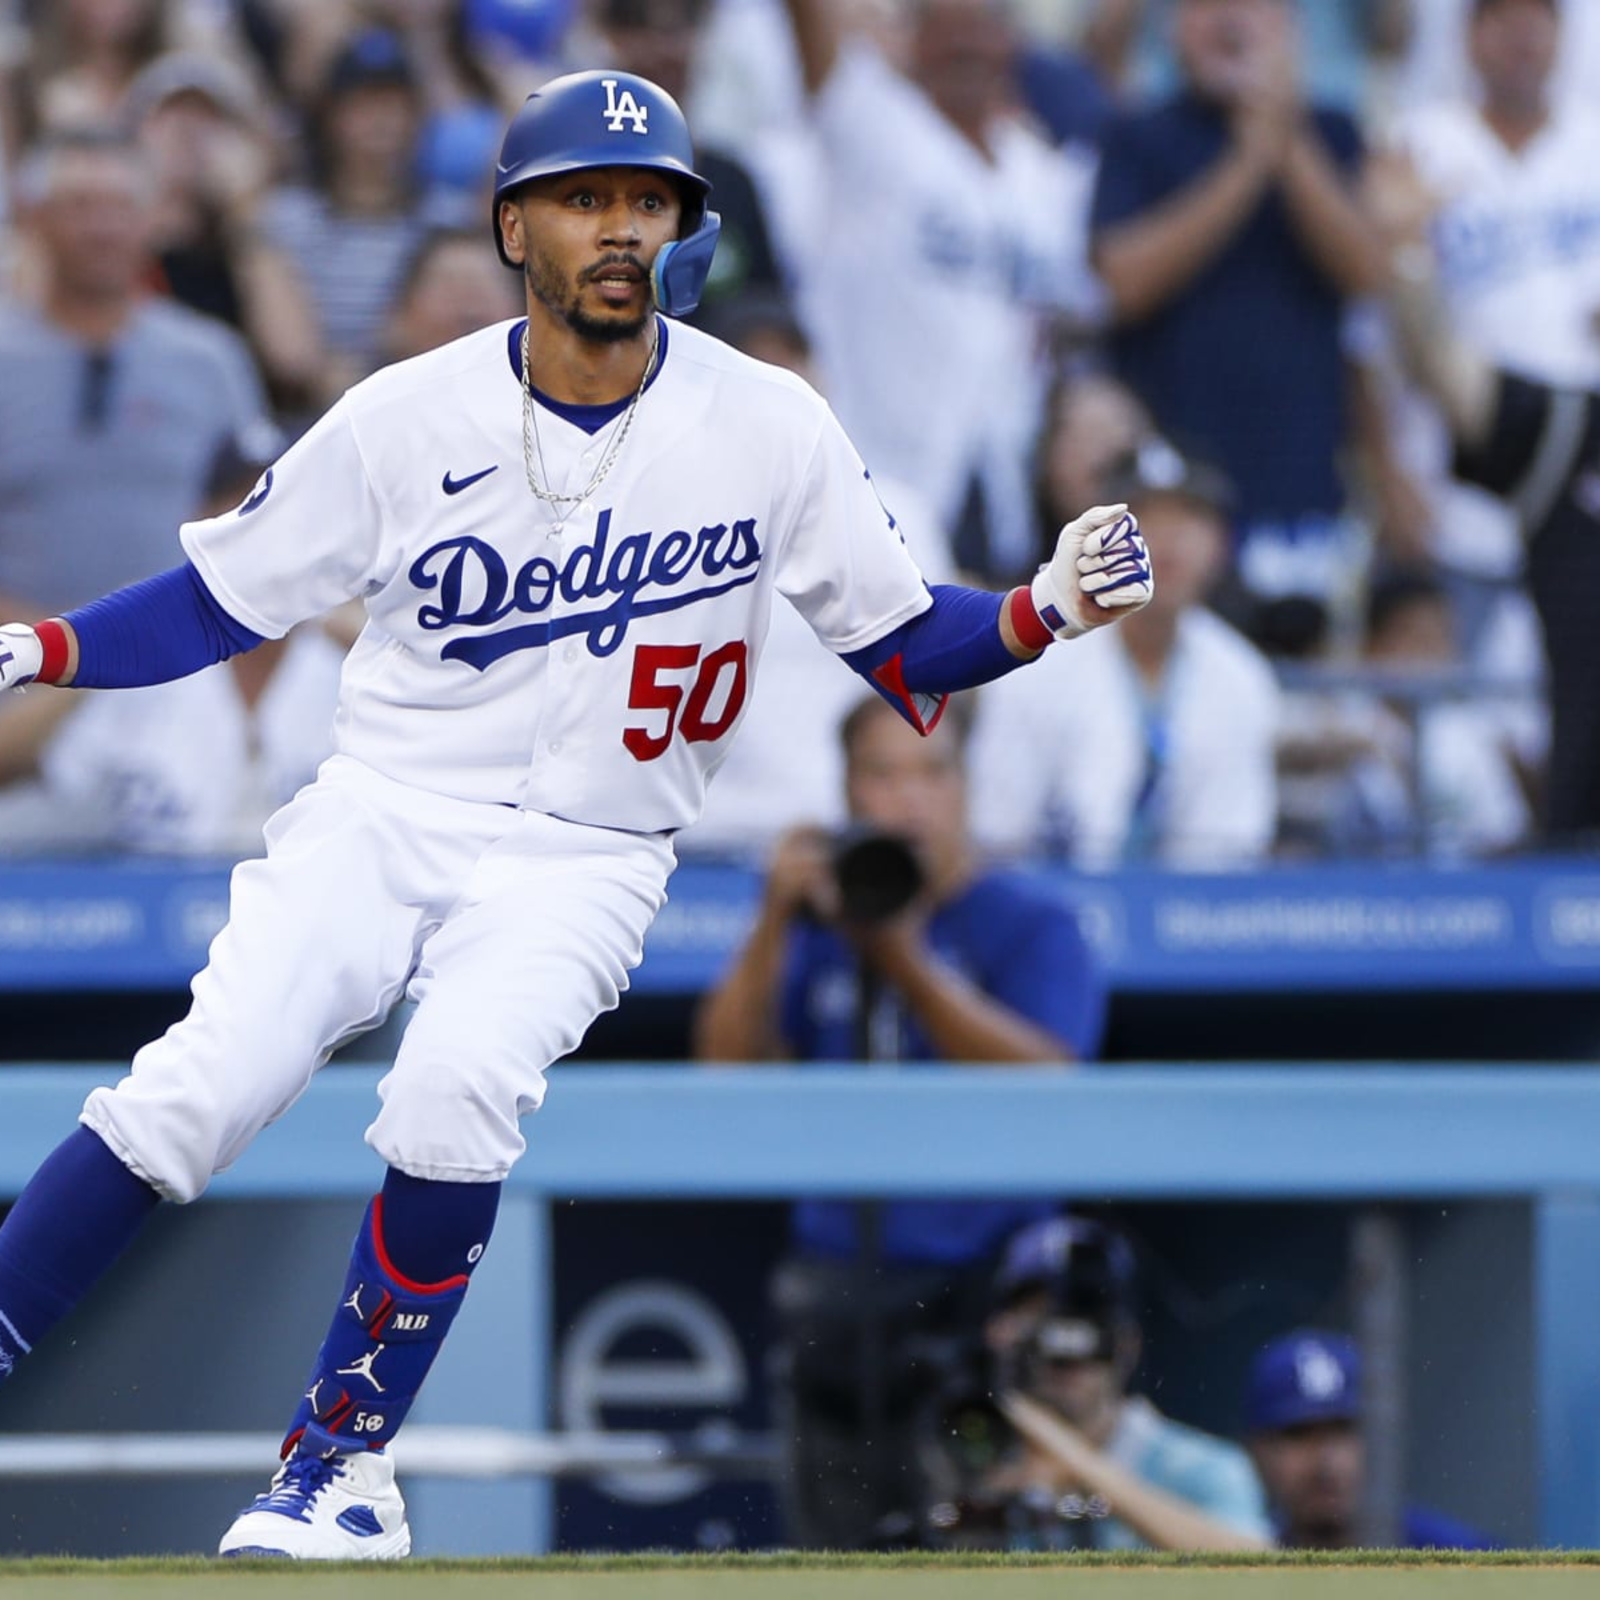 Dodgers star Mookie Betts' brutally honest take on facing Padres